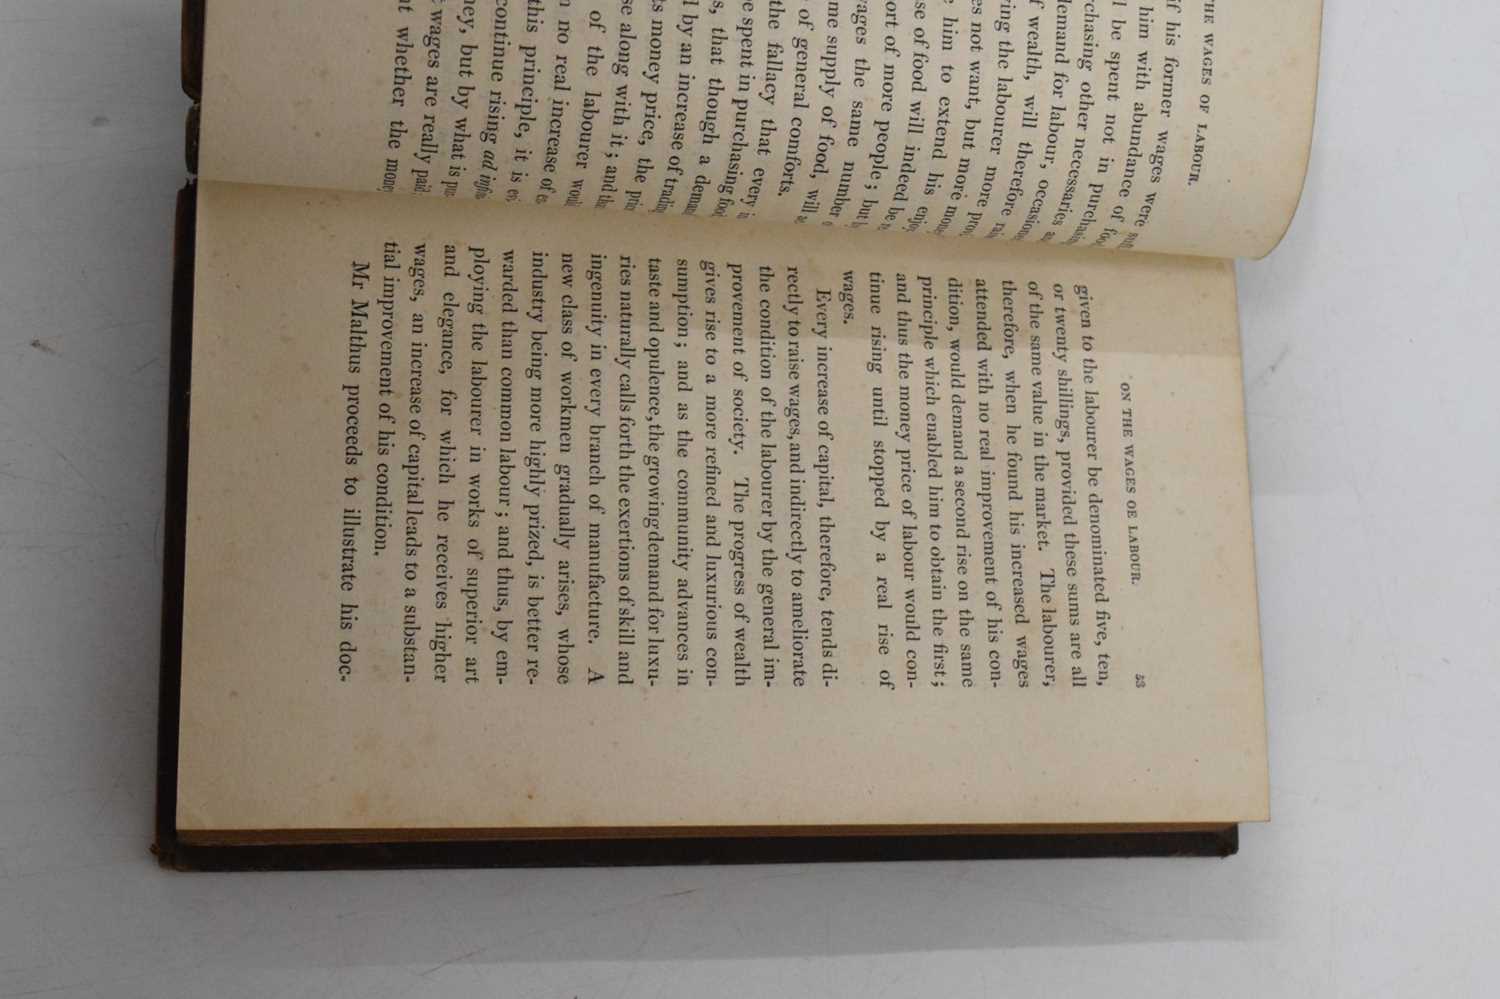 Early edition of The Wealth of Nations, Adam Smith - Image 7 of 9